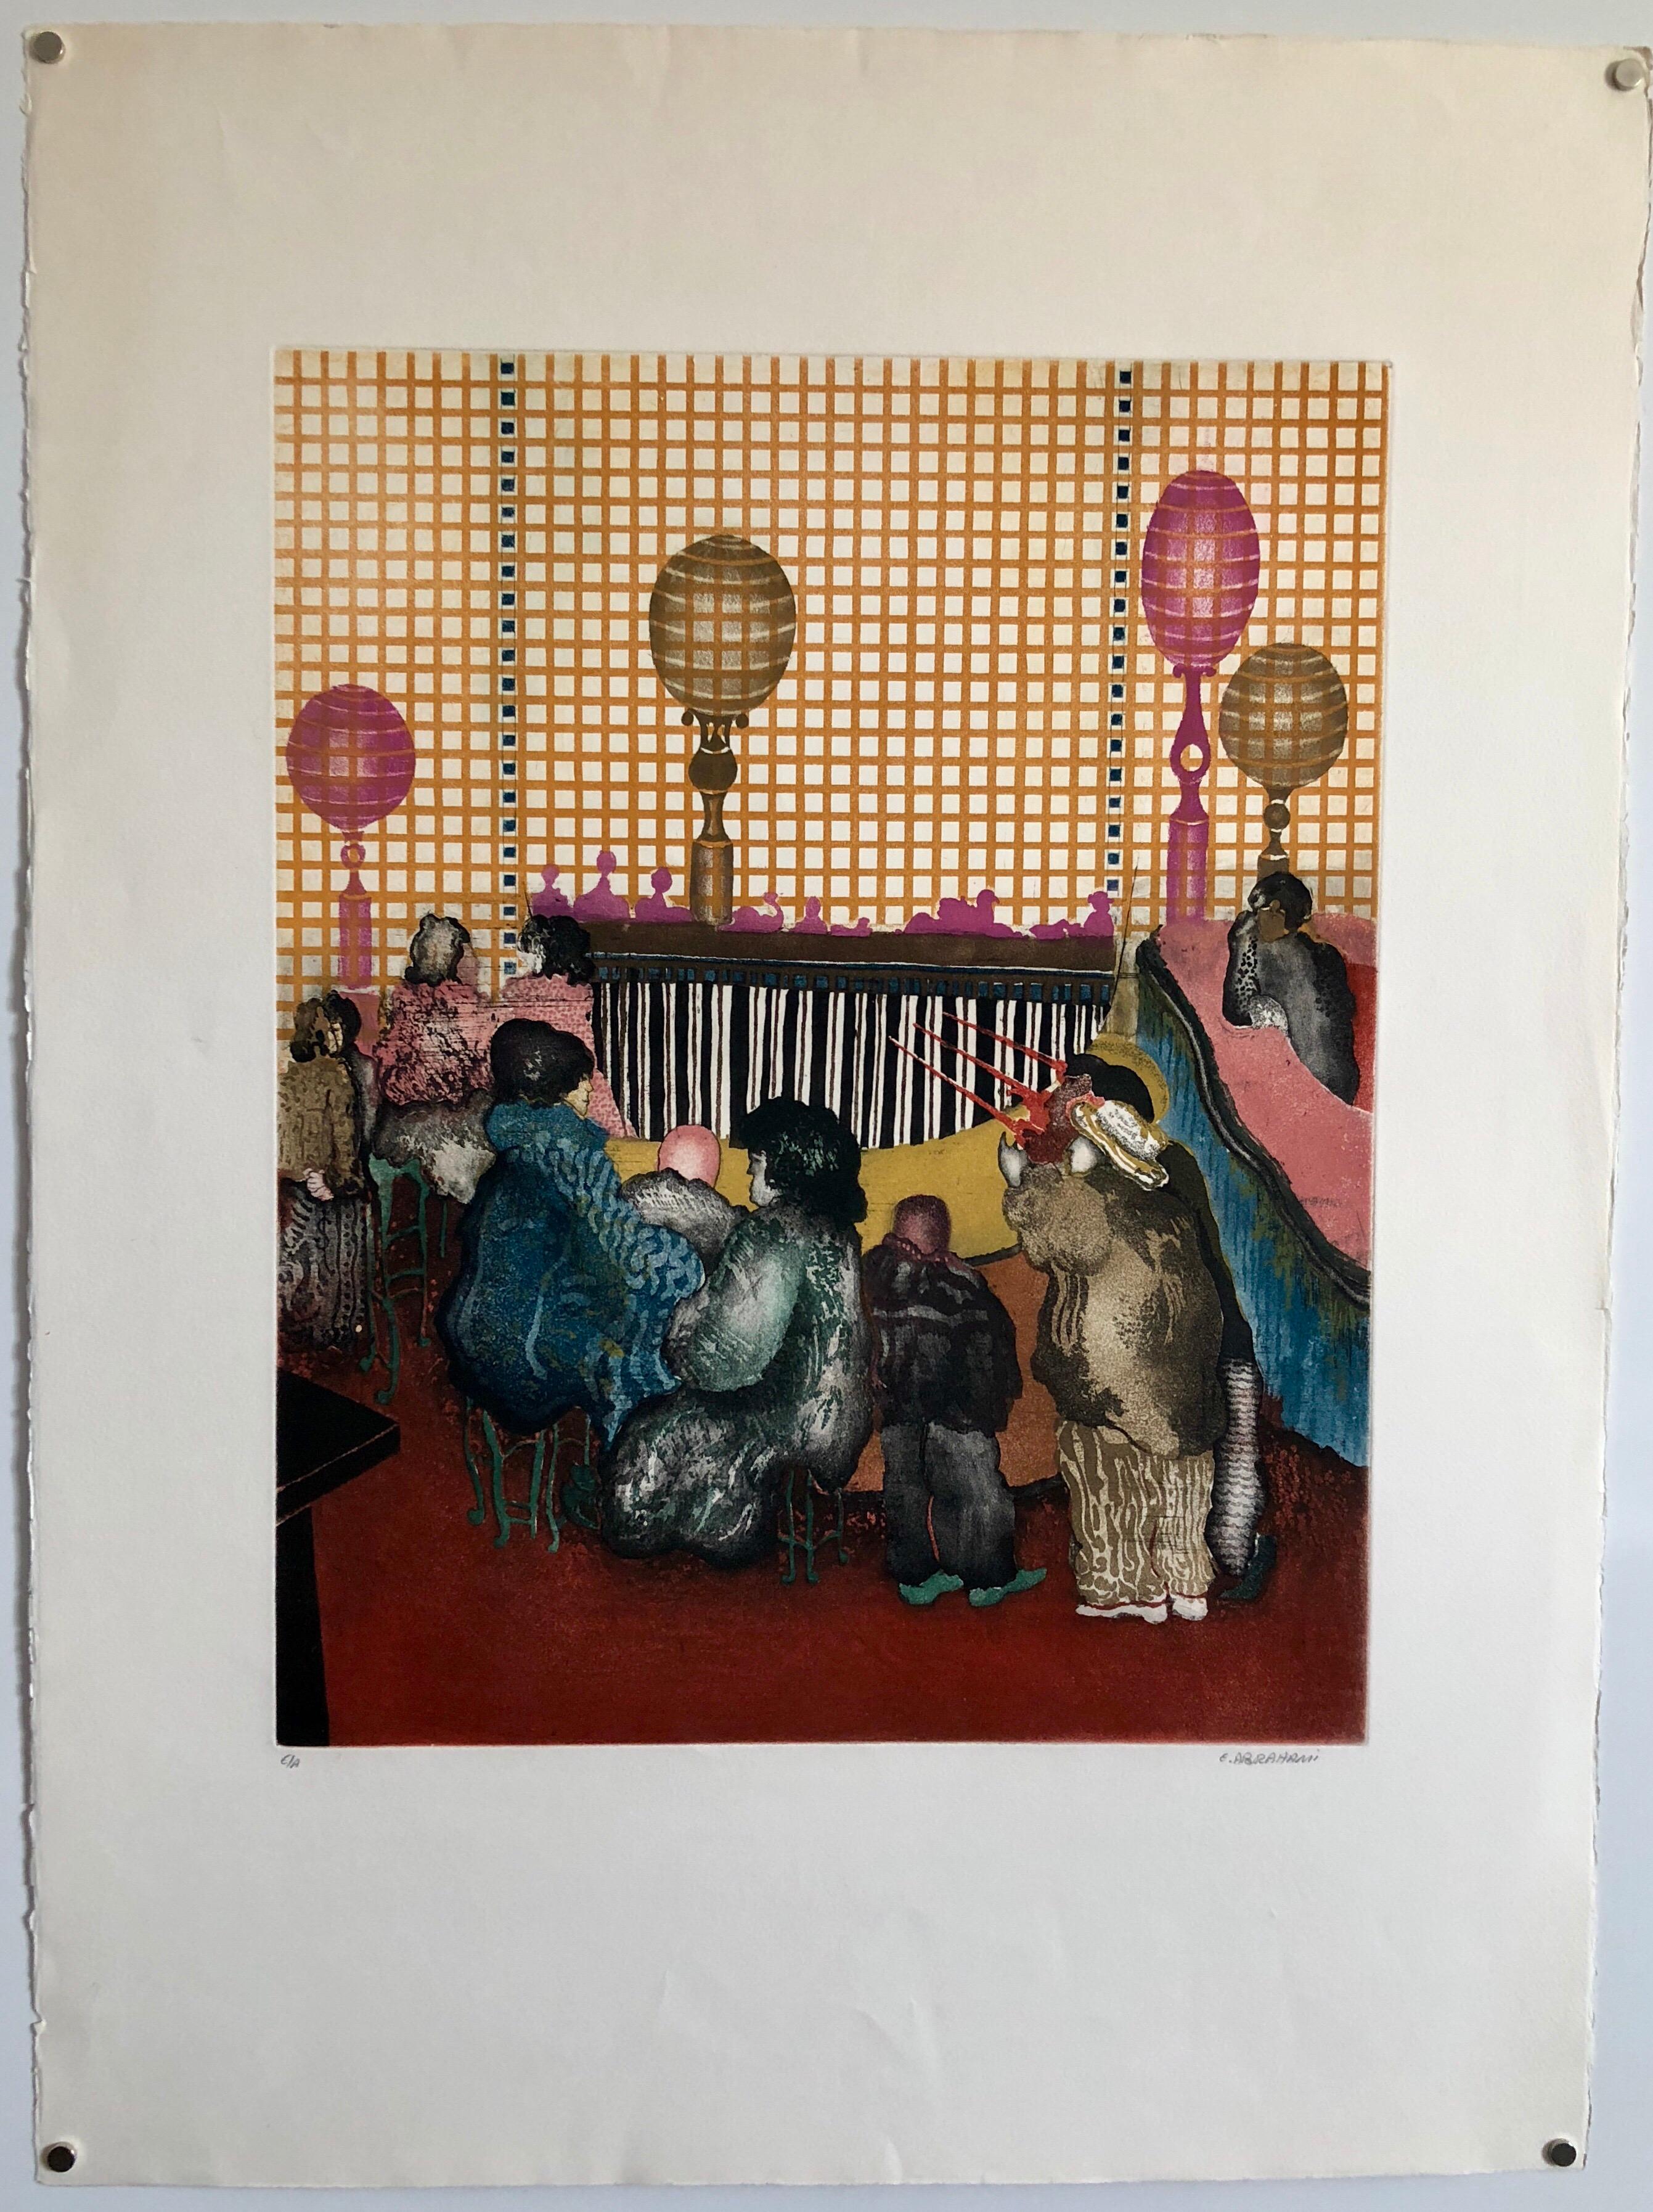 Iranian Israeli Large Aquatint Etching Figurative Abstract Circus Monde Balloons - Beige Abstract Print by Elie (Eliahu) Abrahami